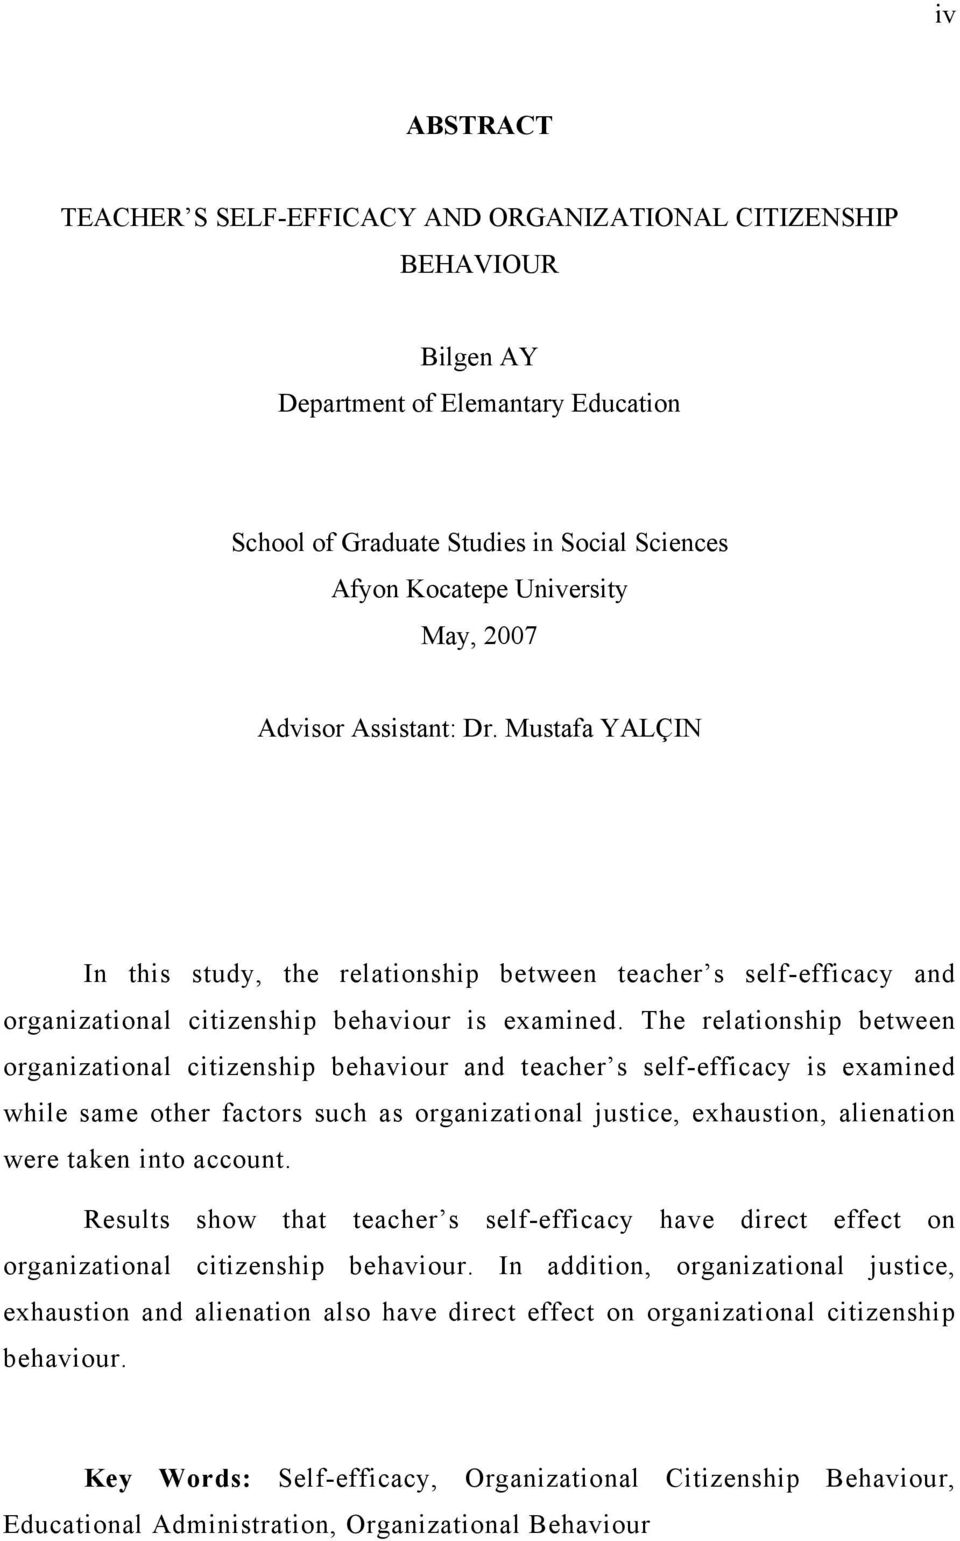 The relationship between organizational citizenship behaviour and teacher s self-efficacy is examined while same other factors such as organizational justice, exhaustion, alienation were taken into